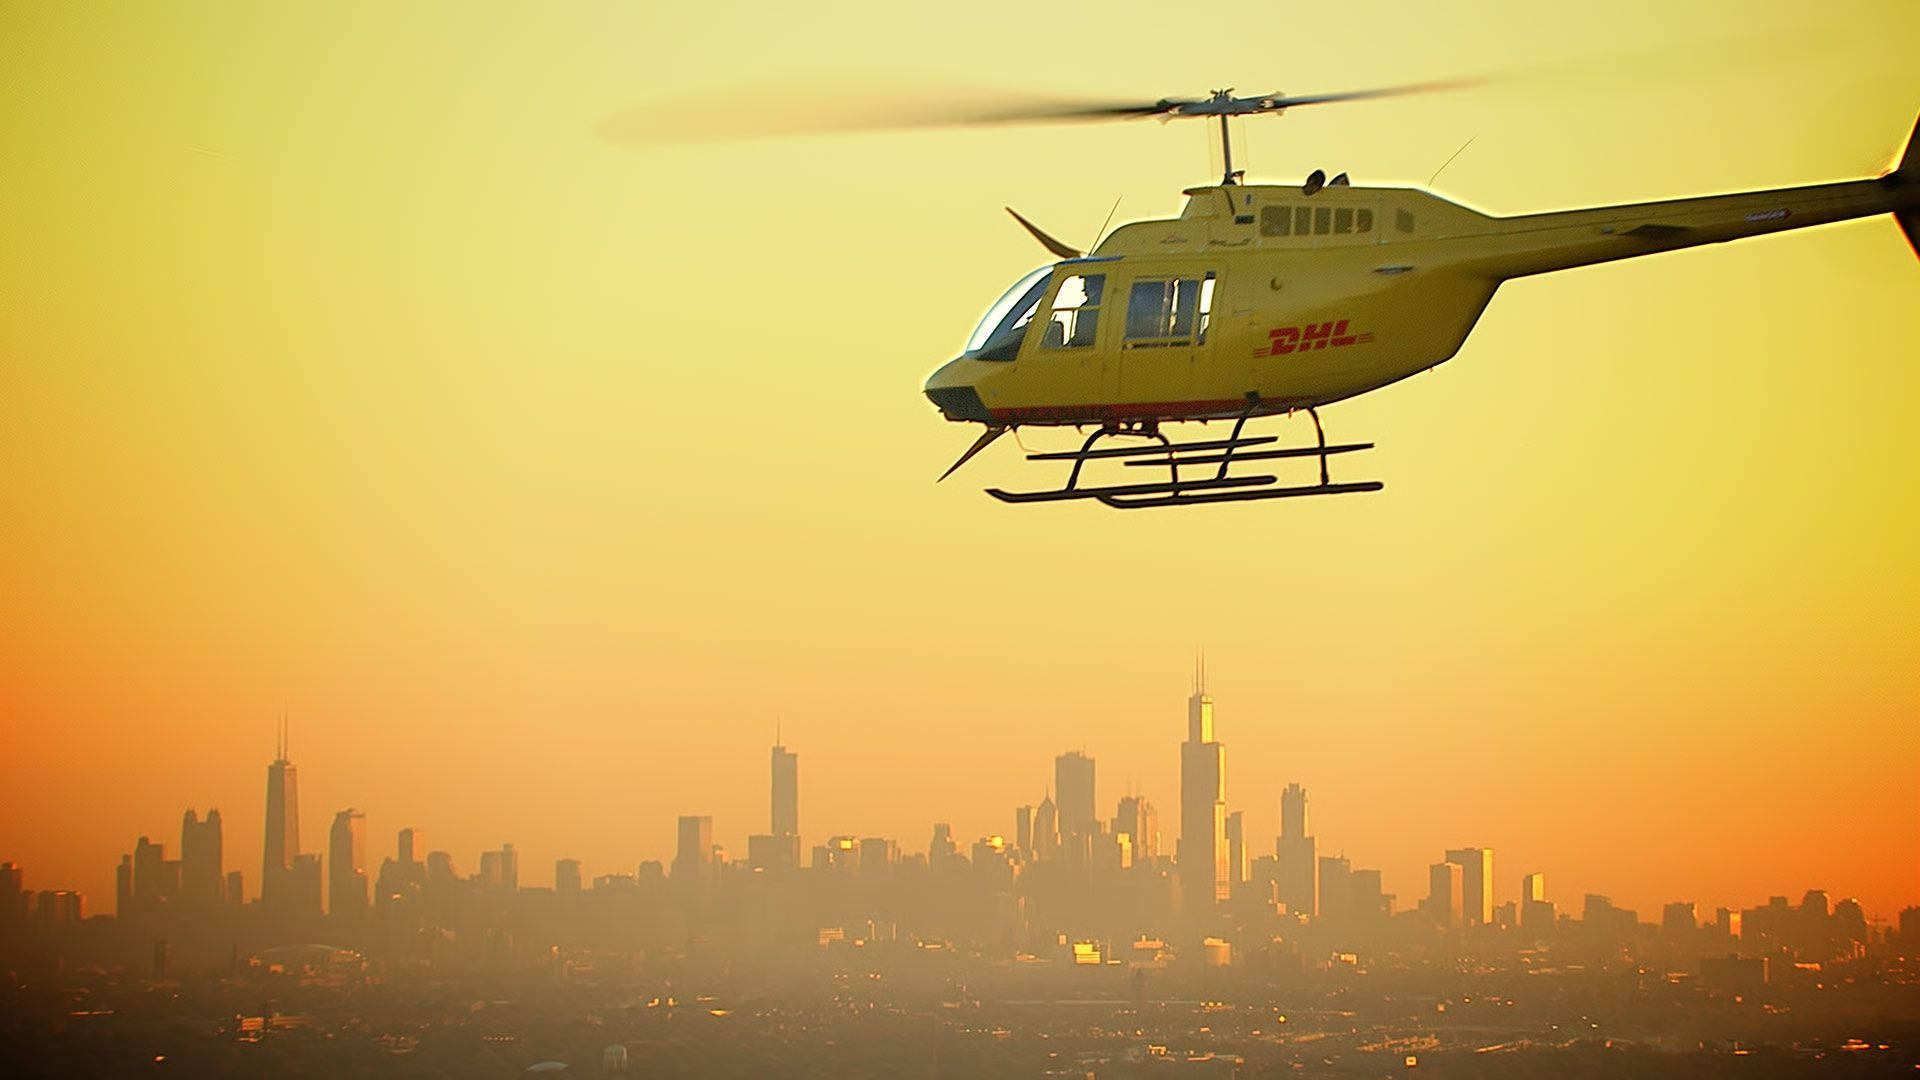 Dhl Helicopter Delivery Background